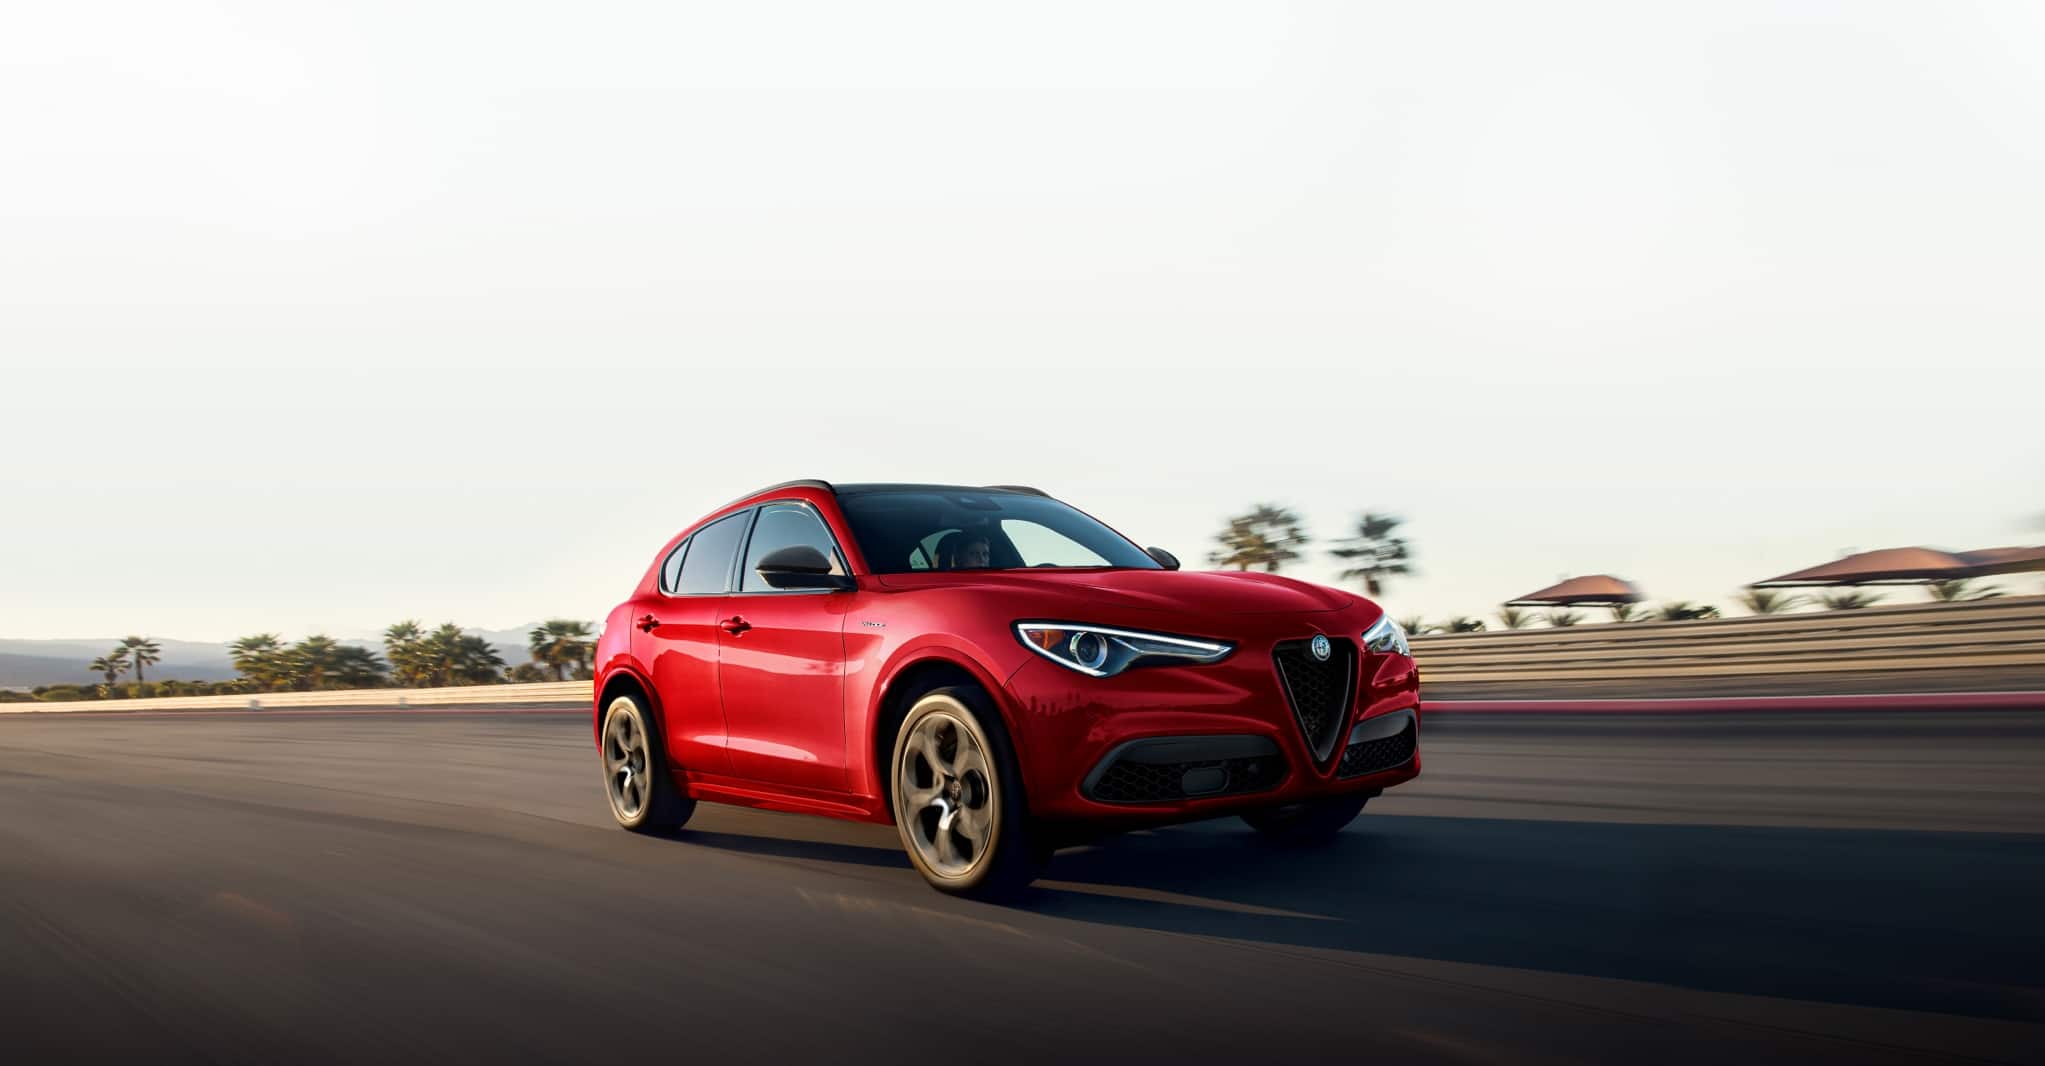 A three-quarter front view of the 2022 Stelvio being driven on a racetrack with palm trees in the background.